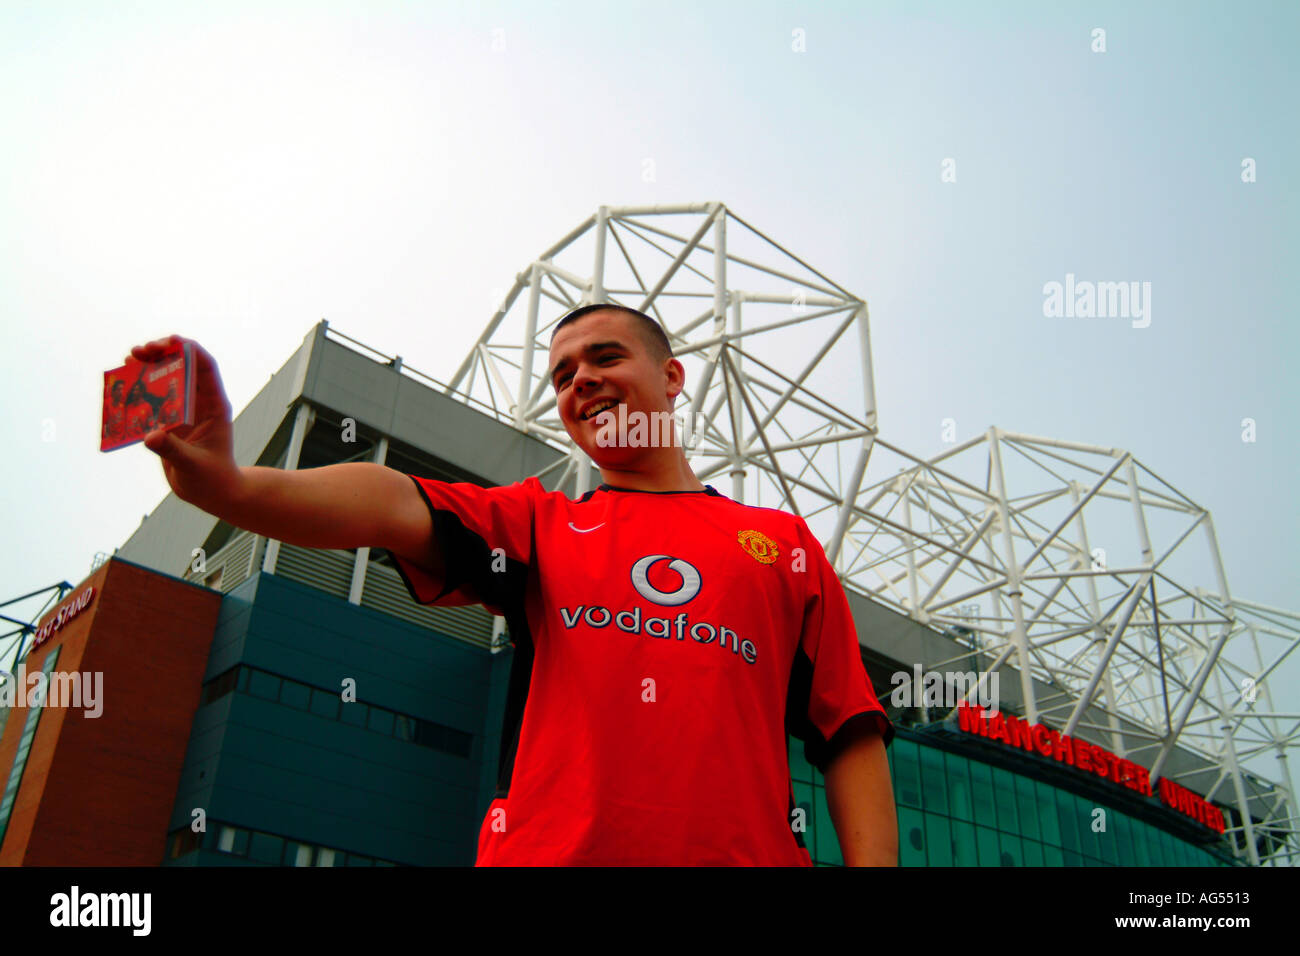 manchester united fan, smiling, Stock Photo